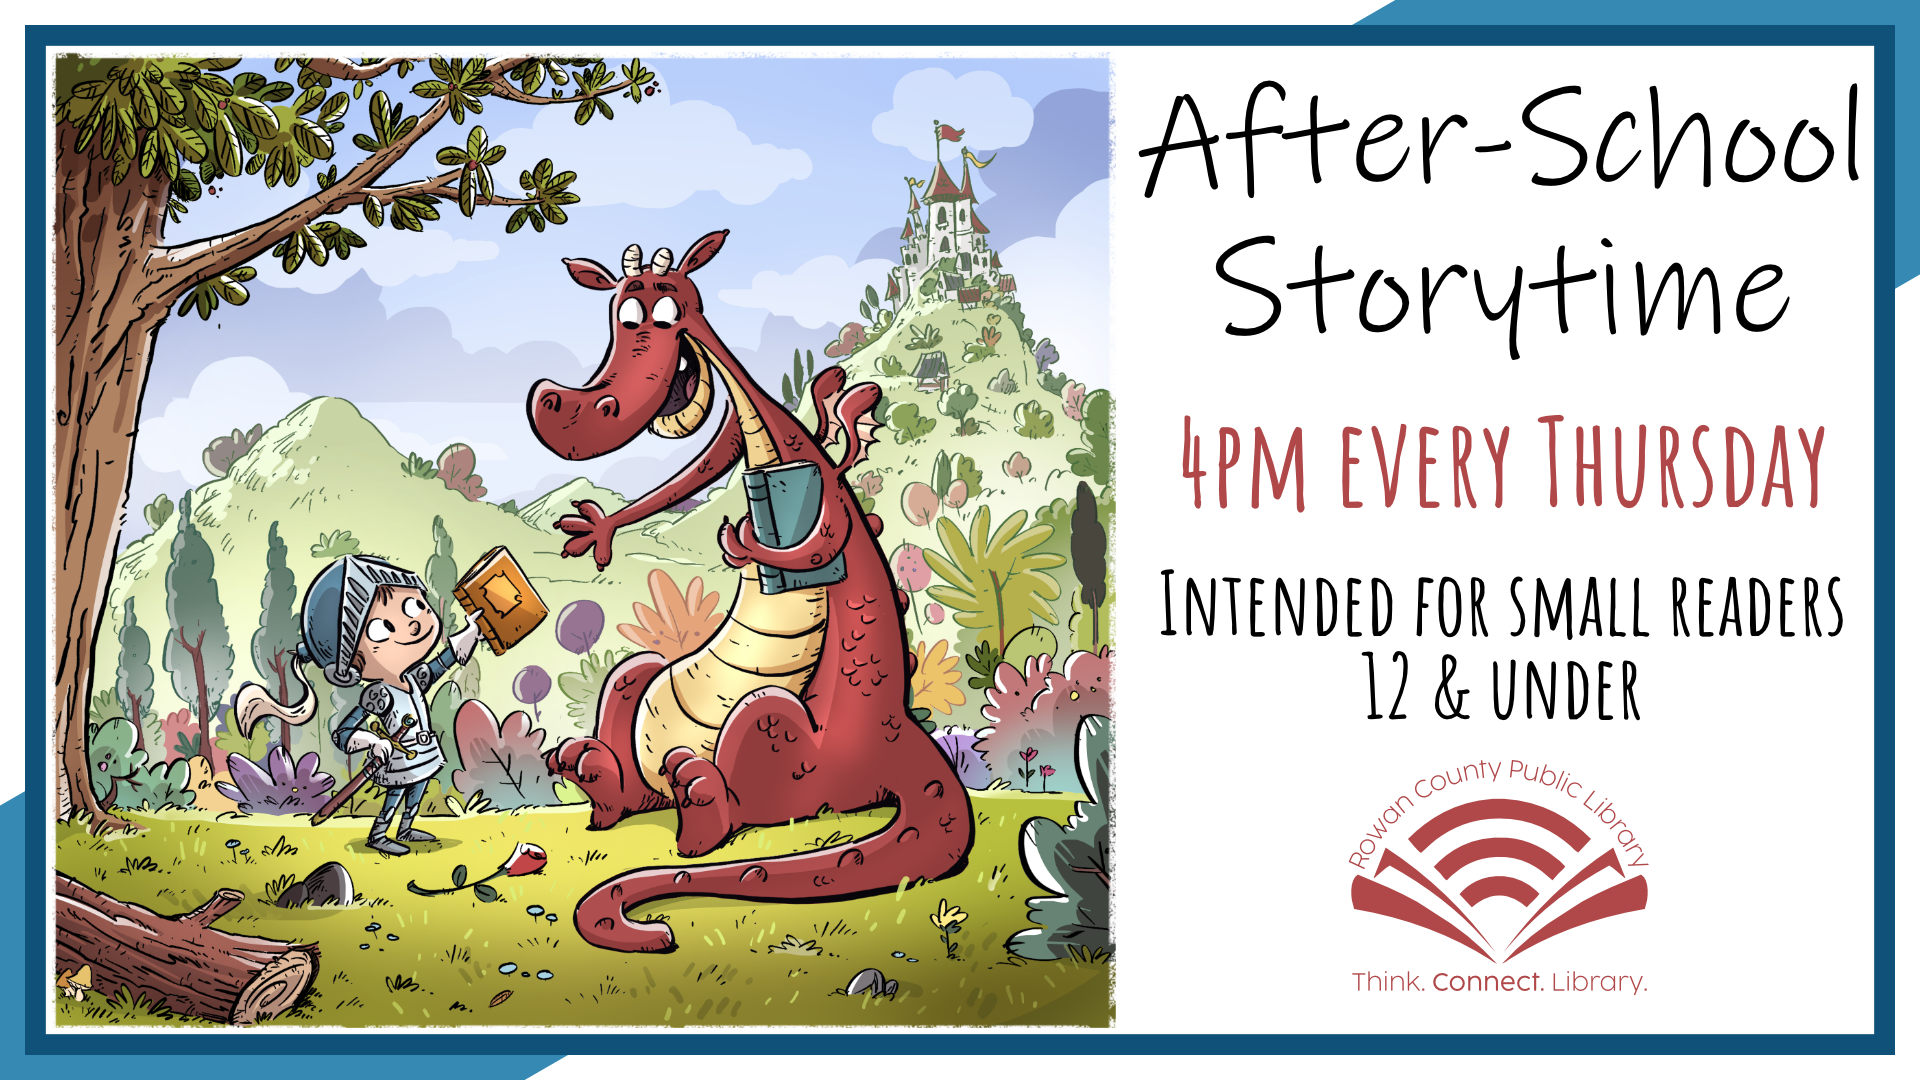 After-School Storytime, Thursdays weekly at 4pm, intended for ages 12 & under